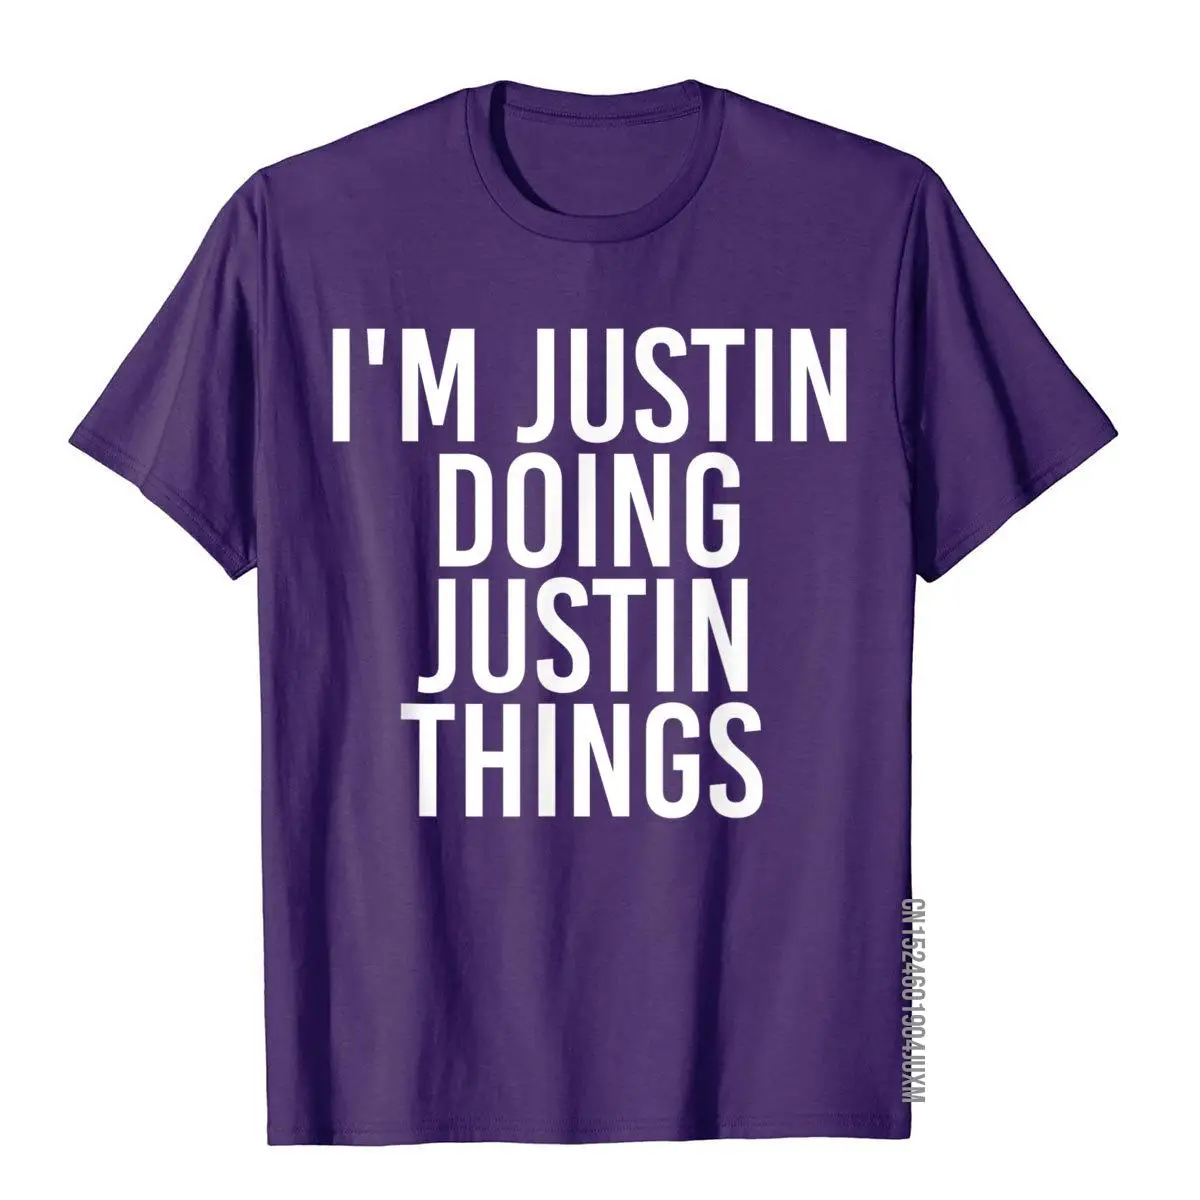 I'M JUSTIN DOING JUSTIN THINGS Shirt Funny Gift Idea__97A1617purple